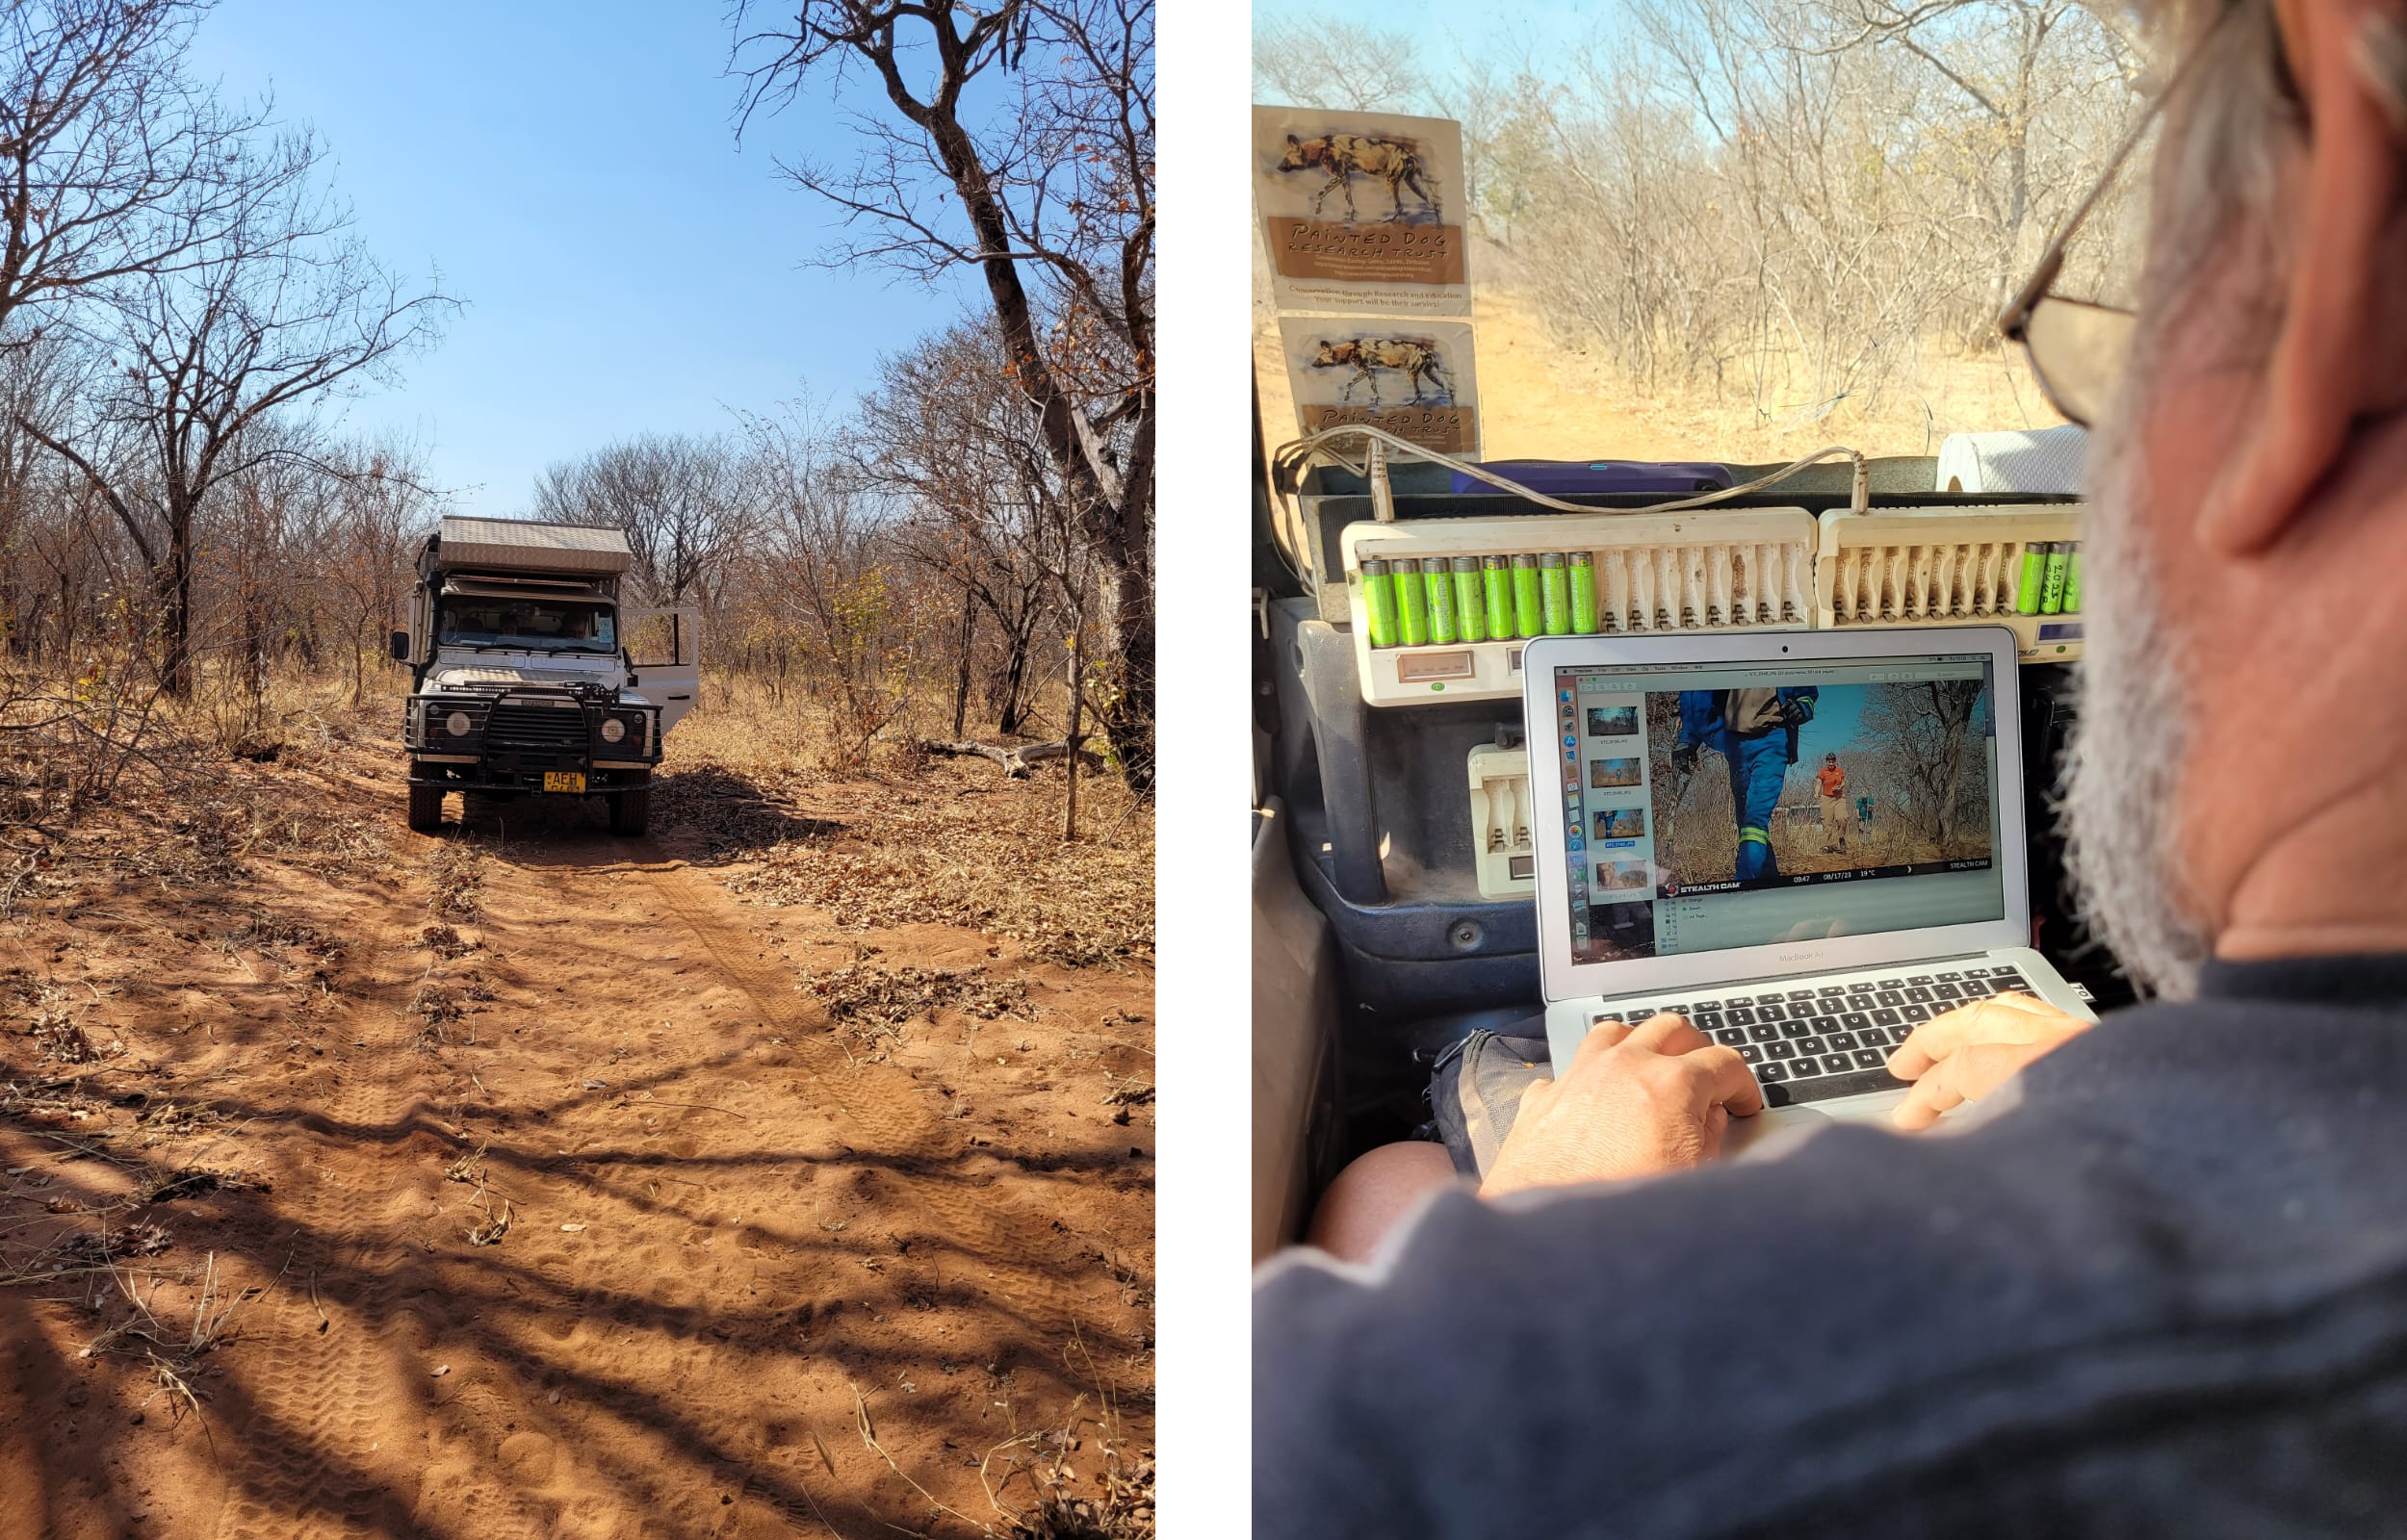 Left: a large truck on a dirt road surrounded by trees
Right: an over the shoulder view of a computer screen displaying footage from a trail. 